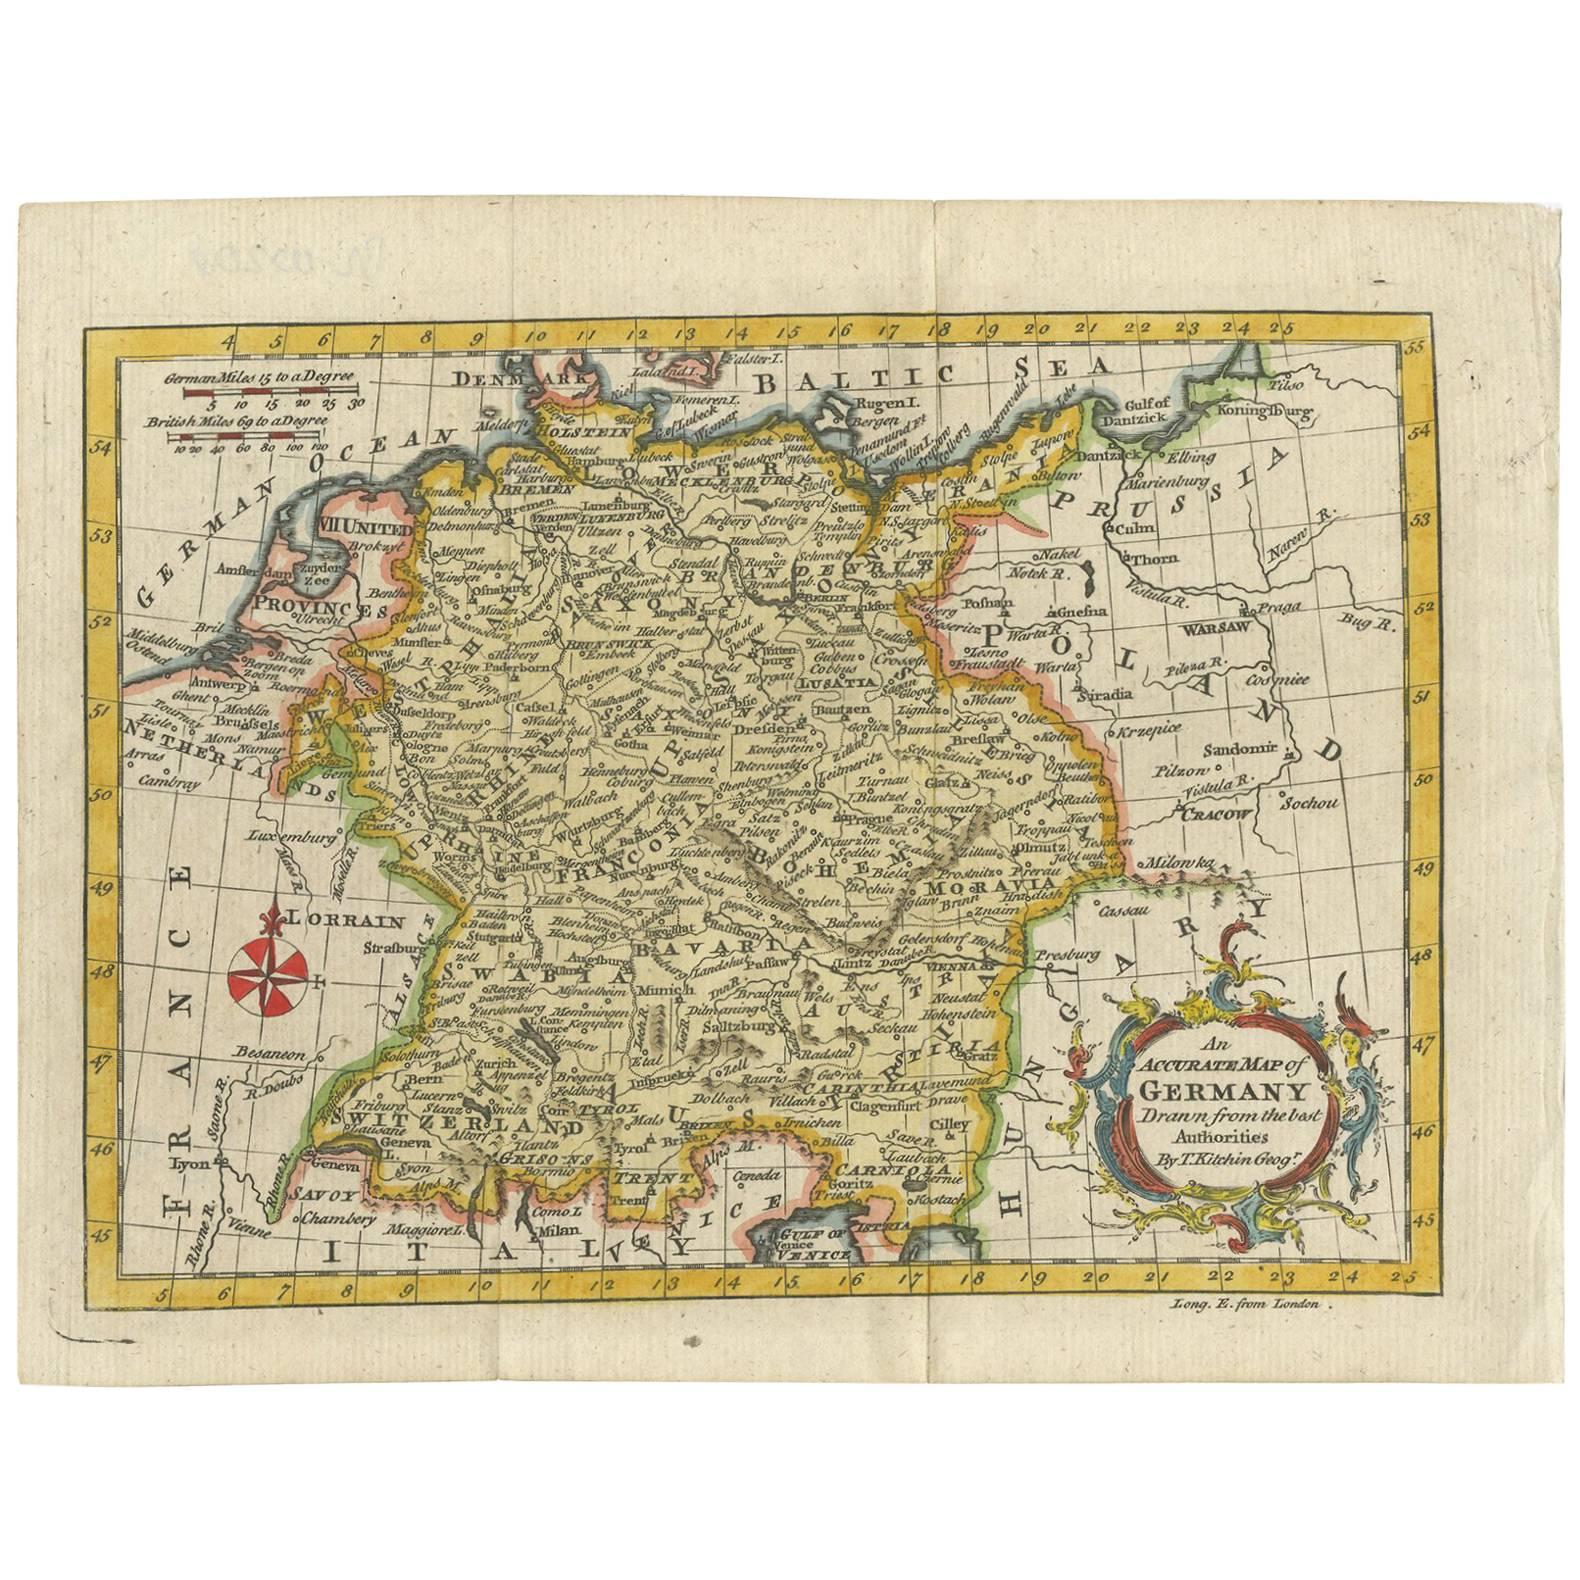 Antique Map of Germany by T. Kitchin, circa 1770